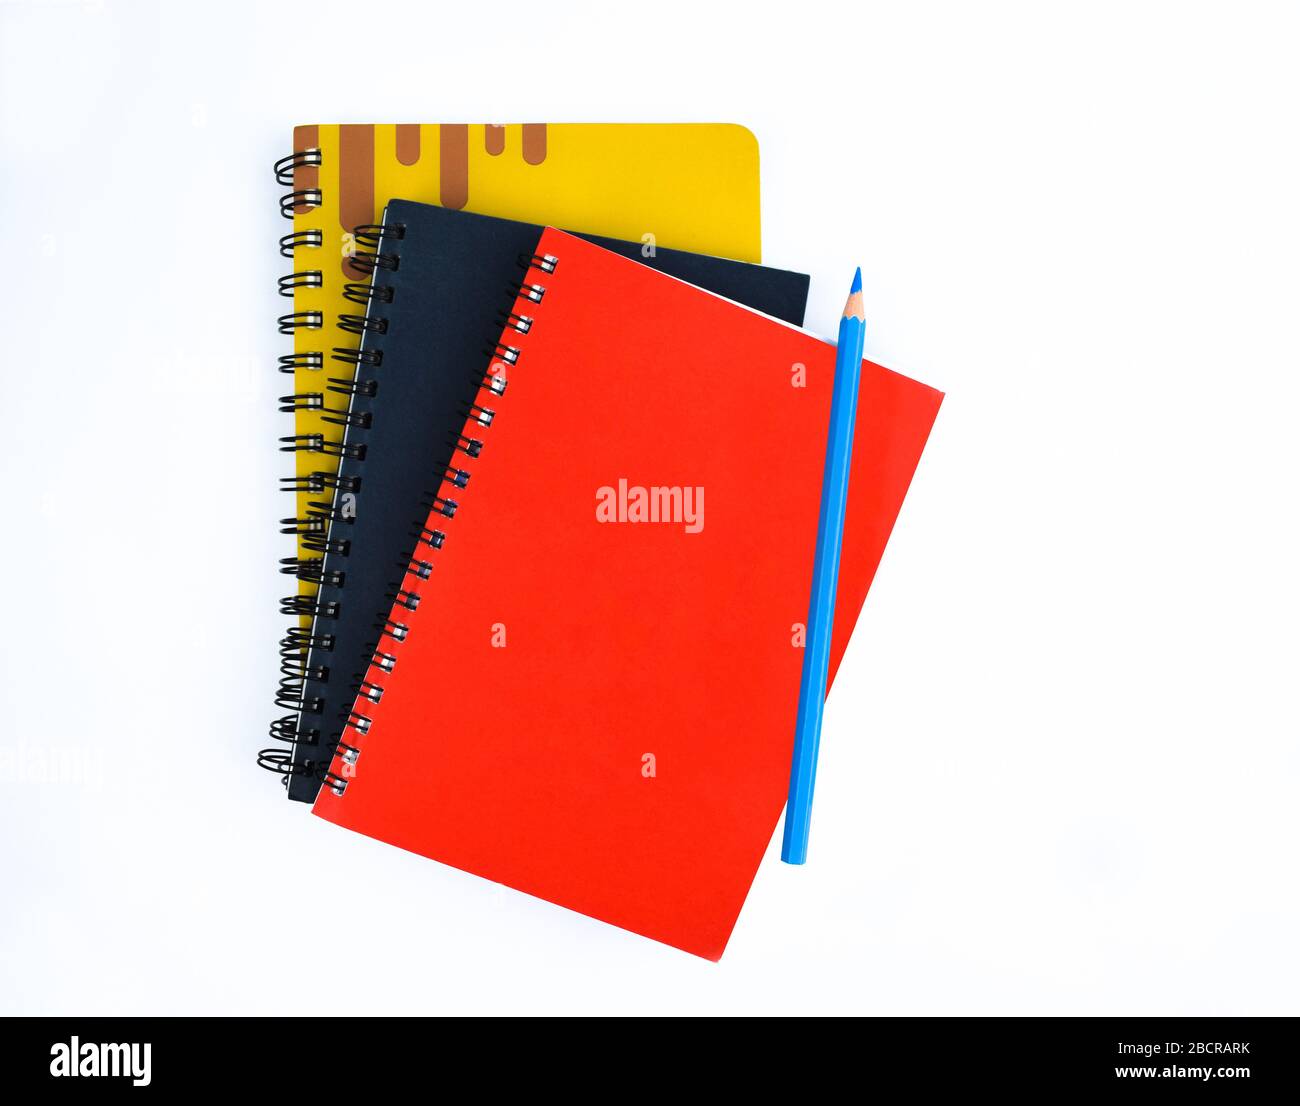 Light blue pencil placed on top of three different colored covered diaries on a white background Stock Photo